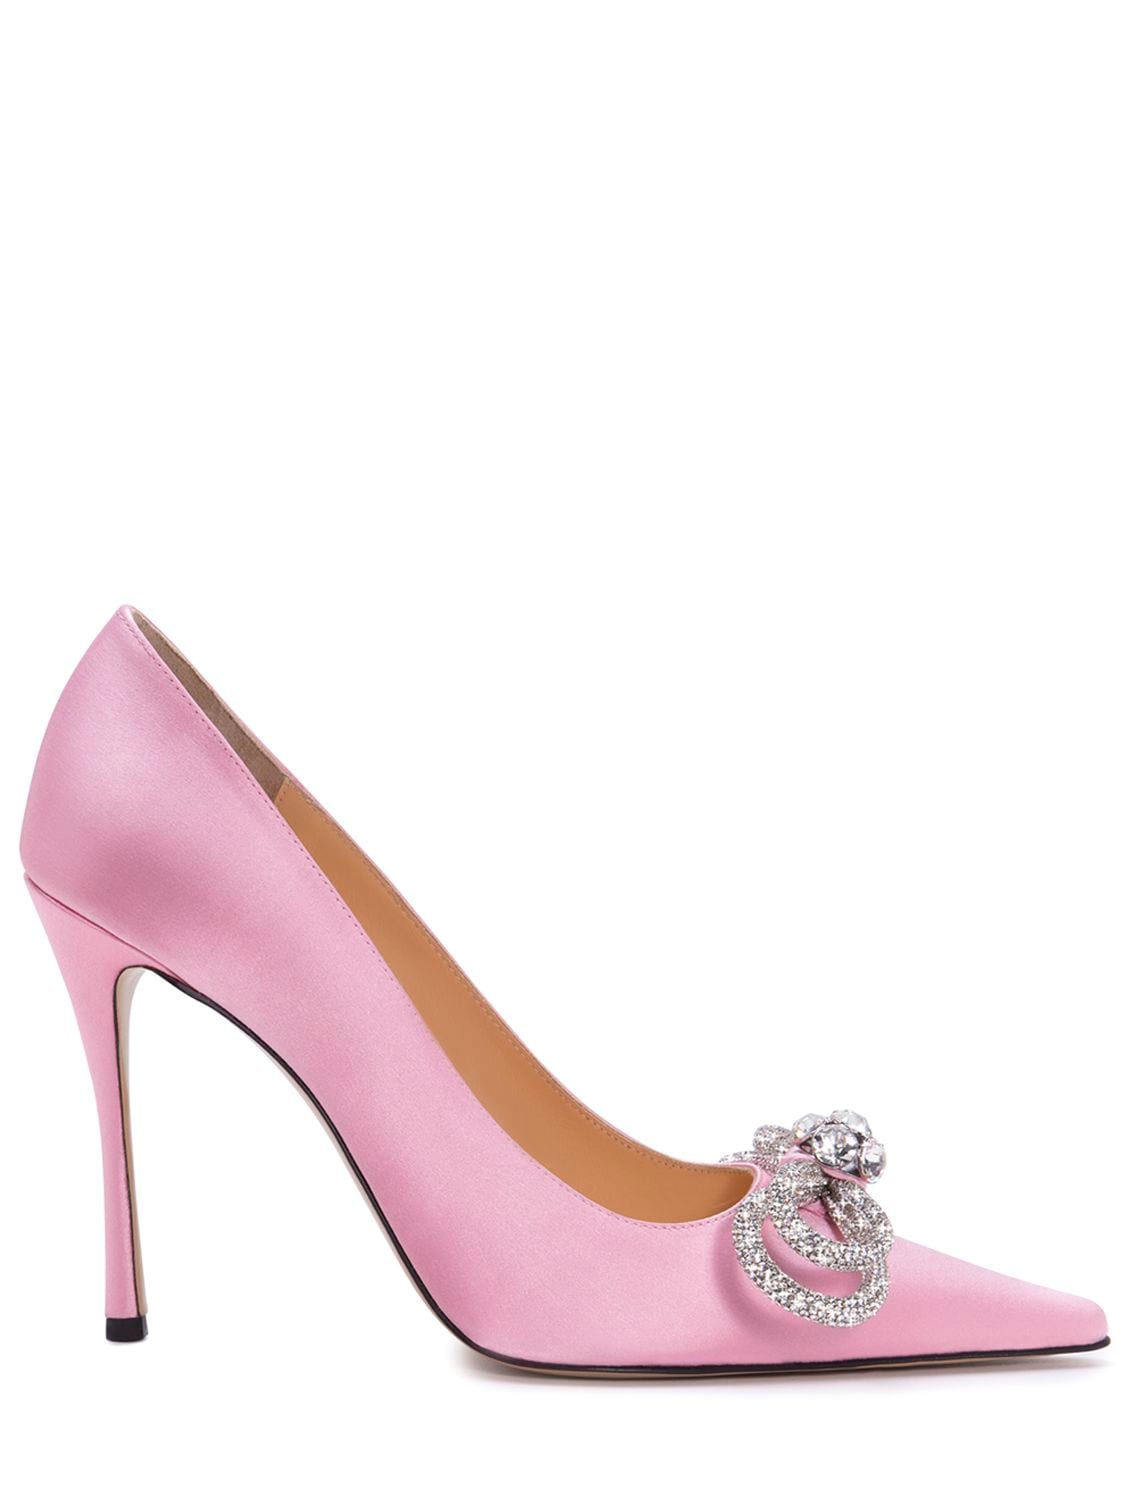 Mach & Mach 110mm Double Bow Satin Pumps In Pink